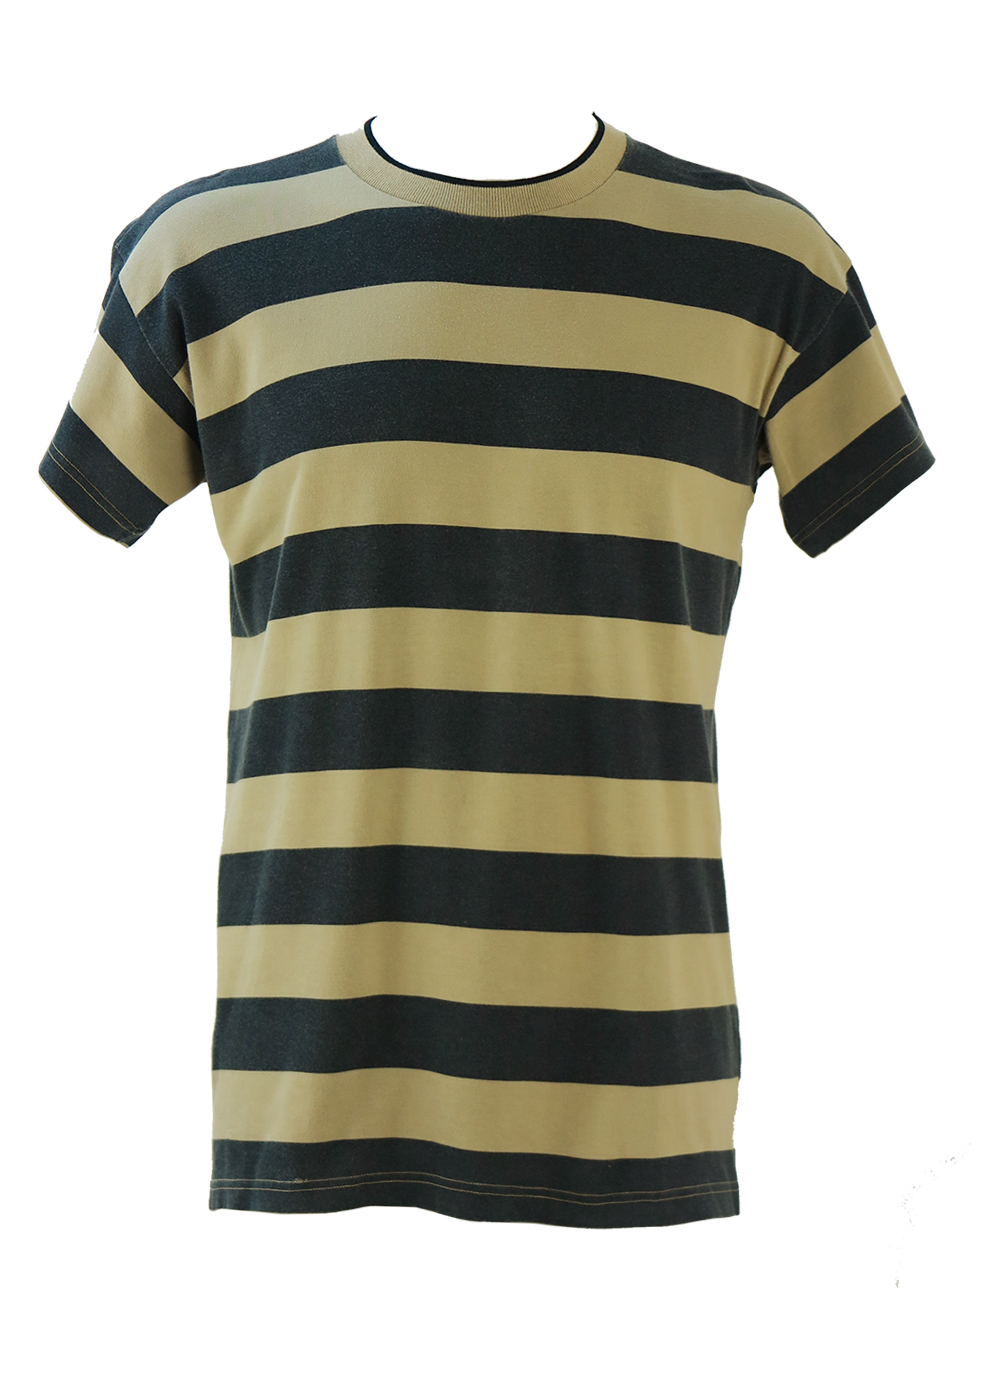 Armani Beige & Black Striped T-shirt with Nautical Applique on Back - M ...